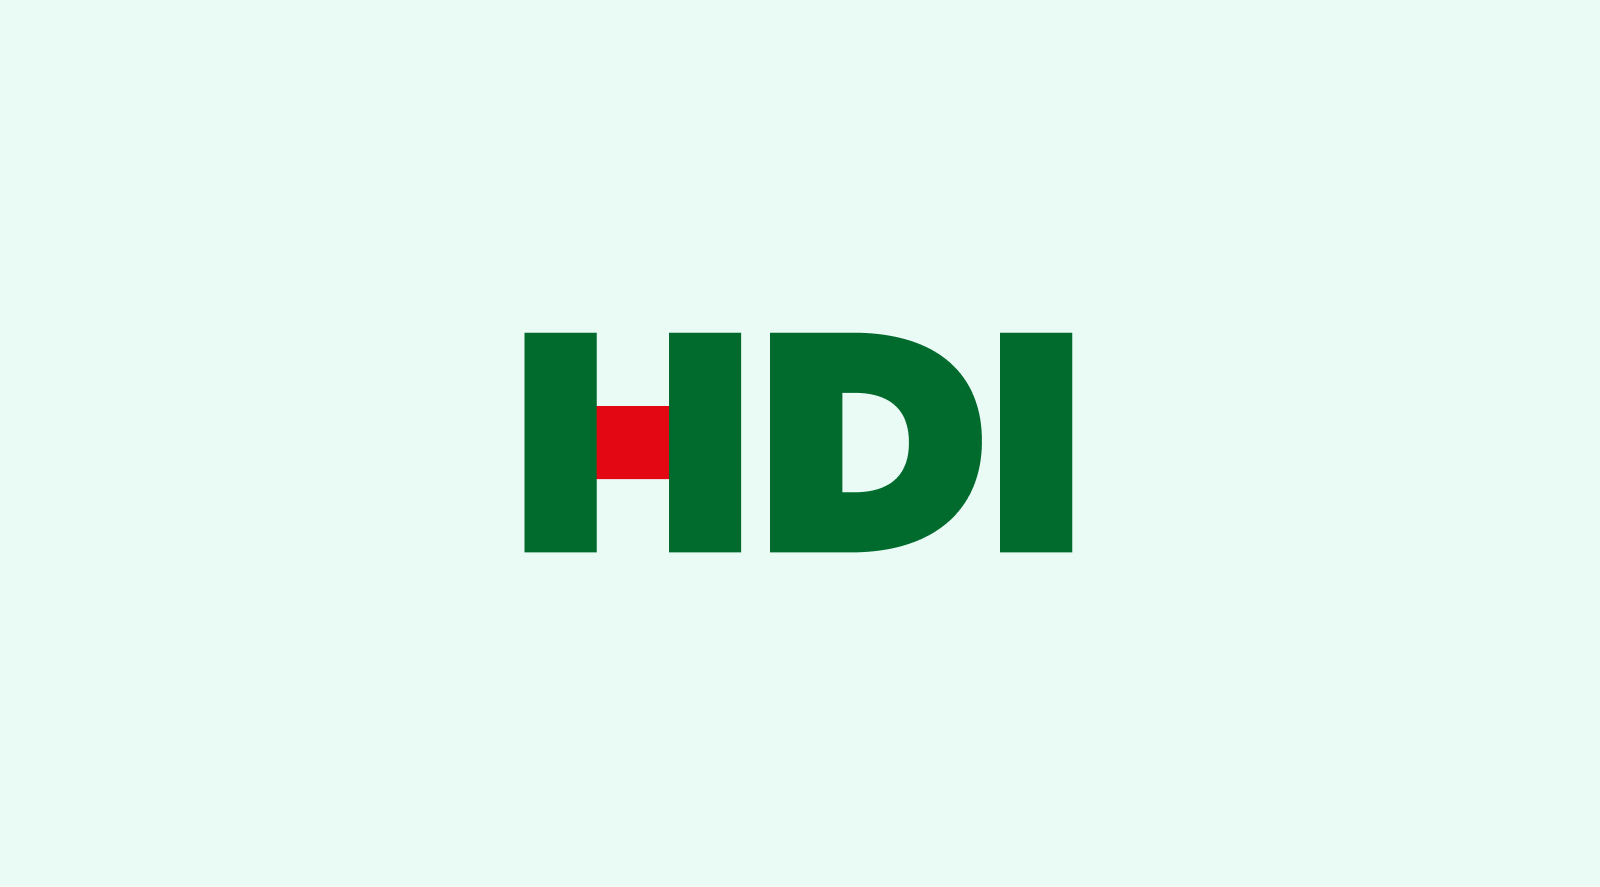 HDI logo on a light green background